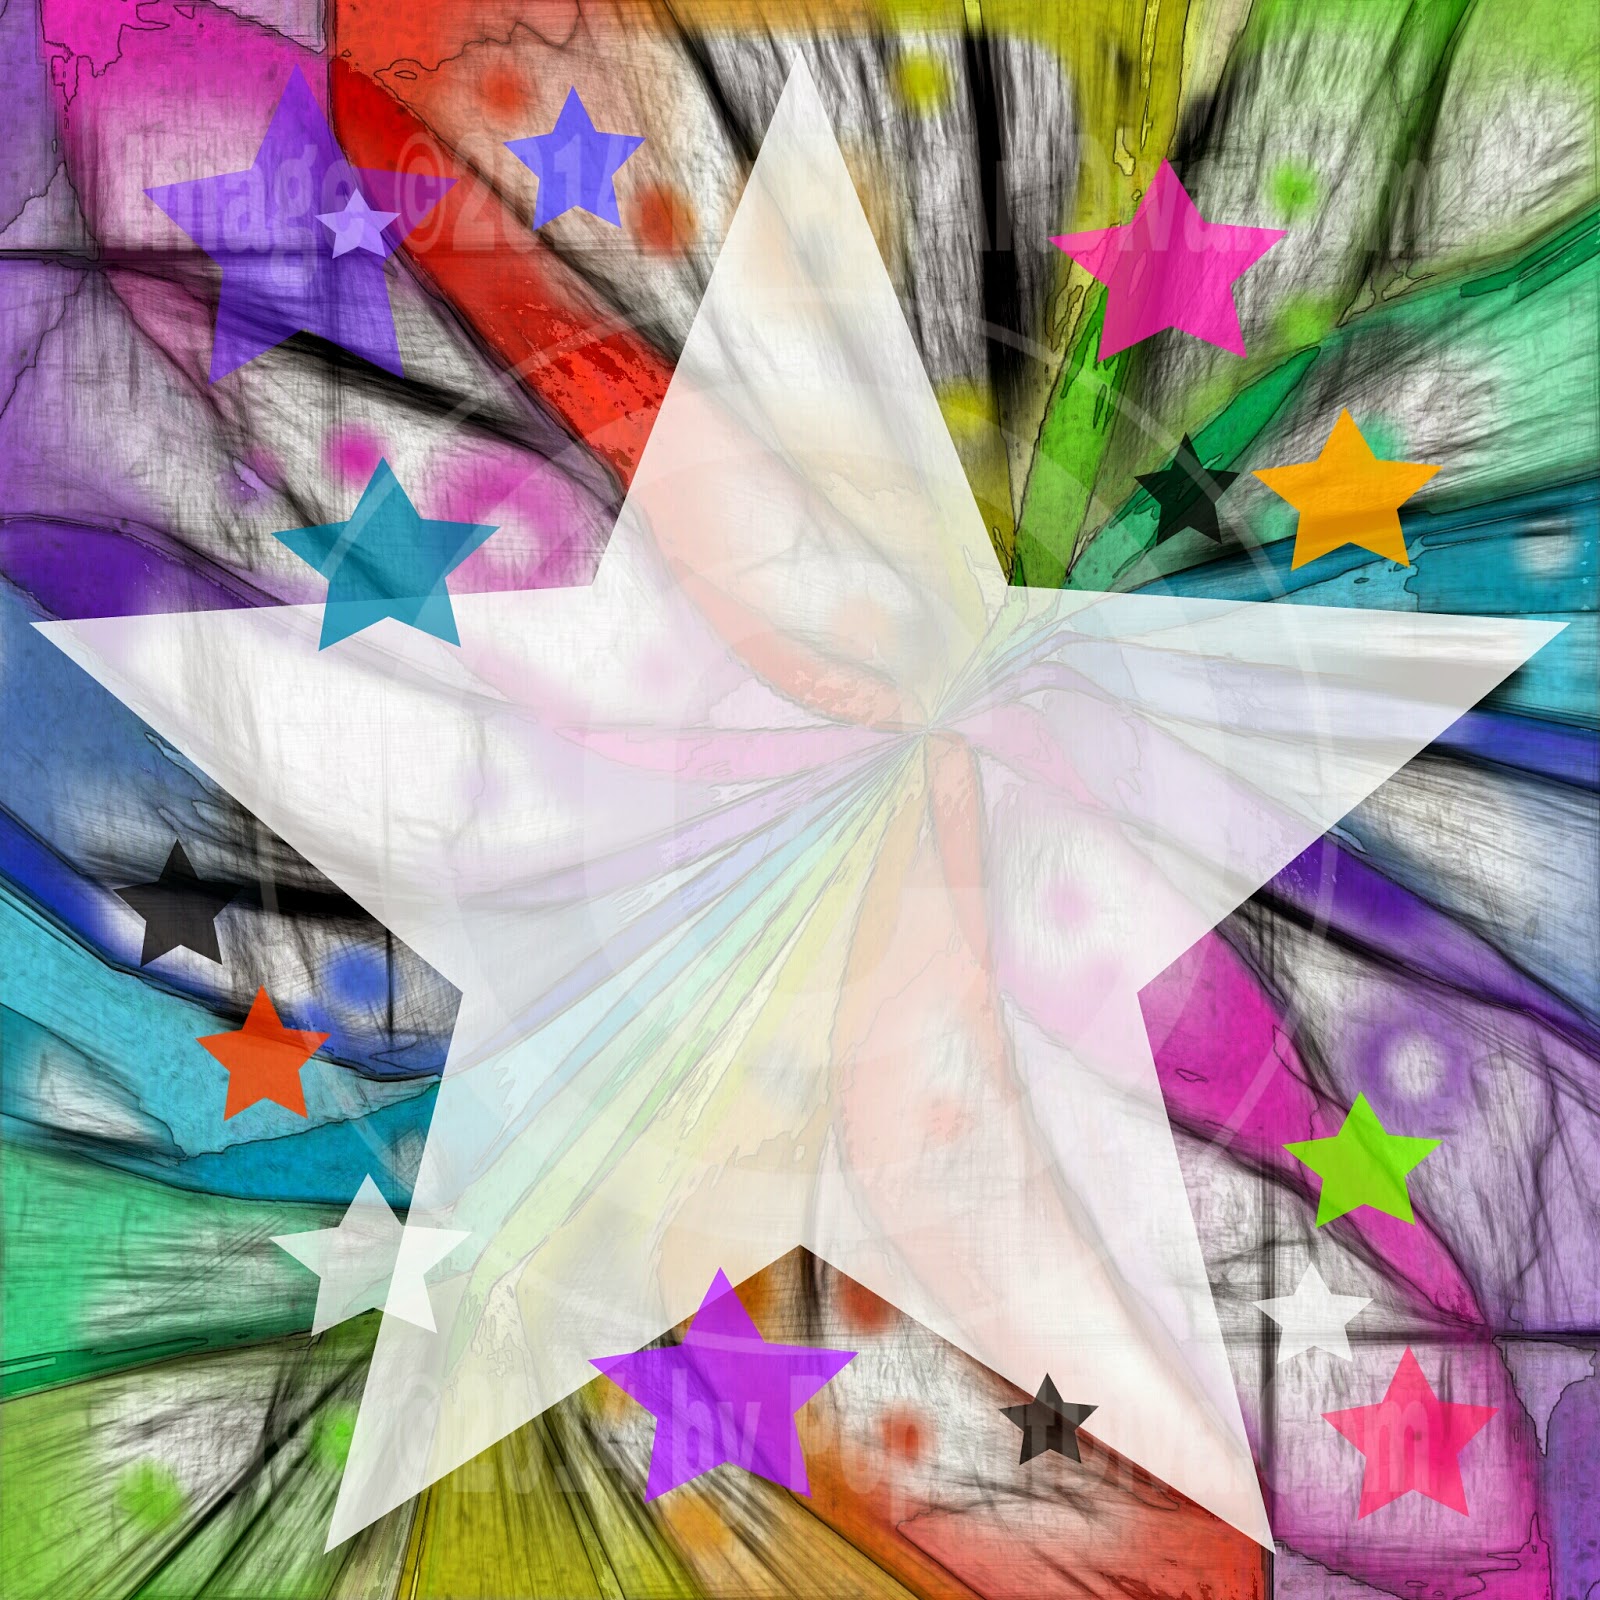 http://store.payloadz.com/details/2084287-photos-and-images-clip-art-kaleidoscope-star-frame-border-web-graphic.html